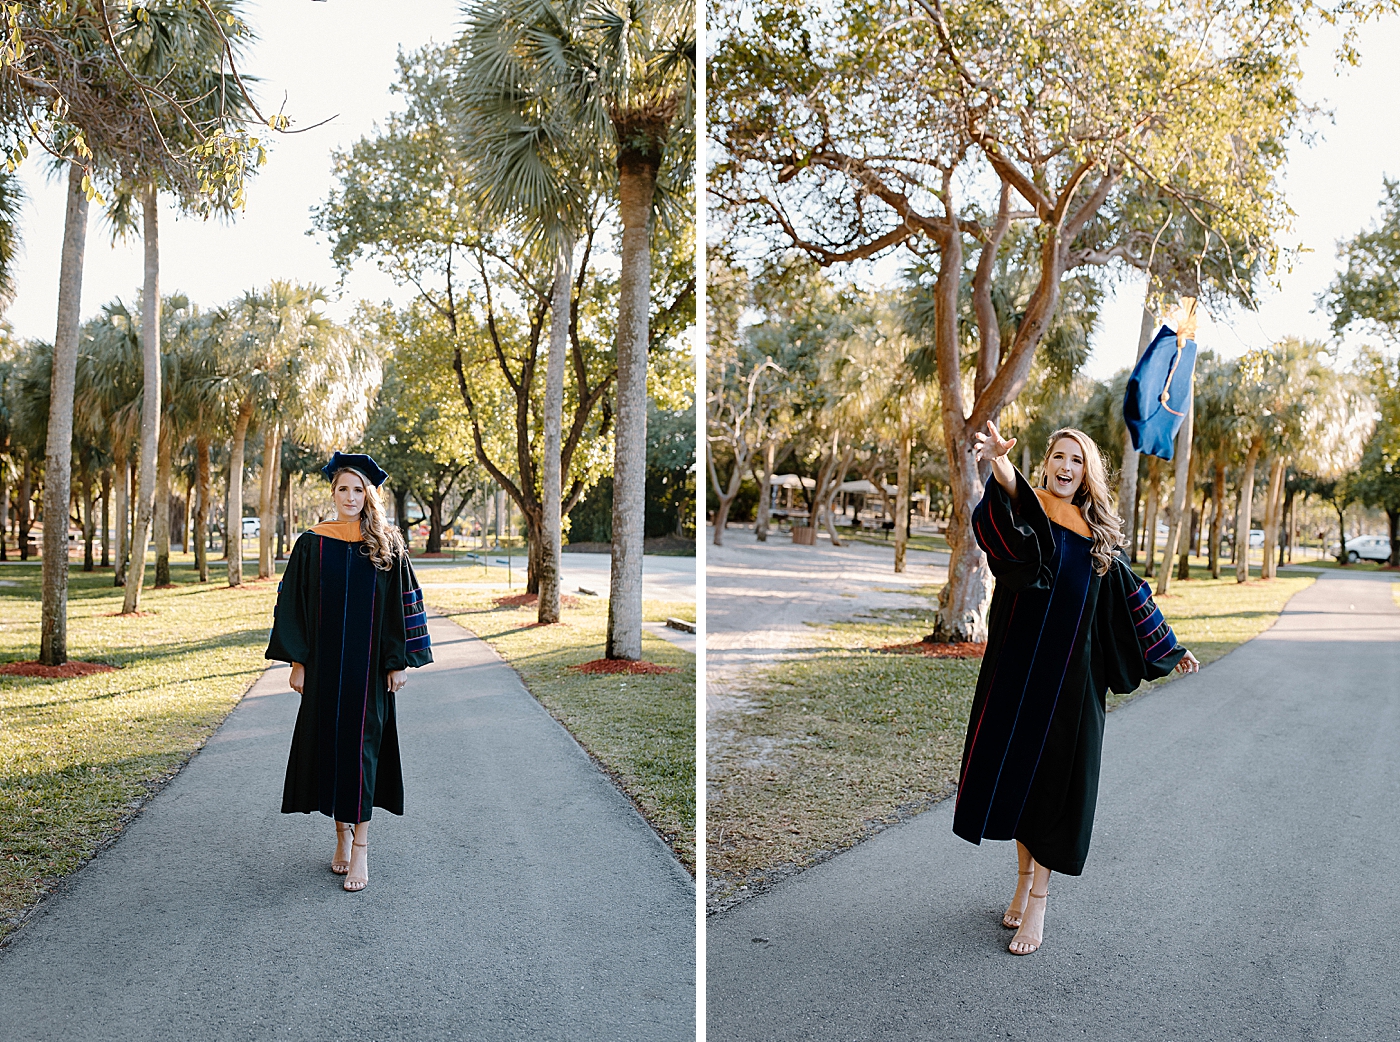 Lady in Graduation gown walking on path with palm trees and tossing grad cap Red Reef Park Engagement Photography captured by South Florida Engagement Photographer